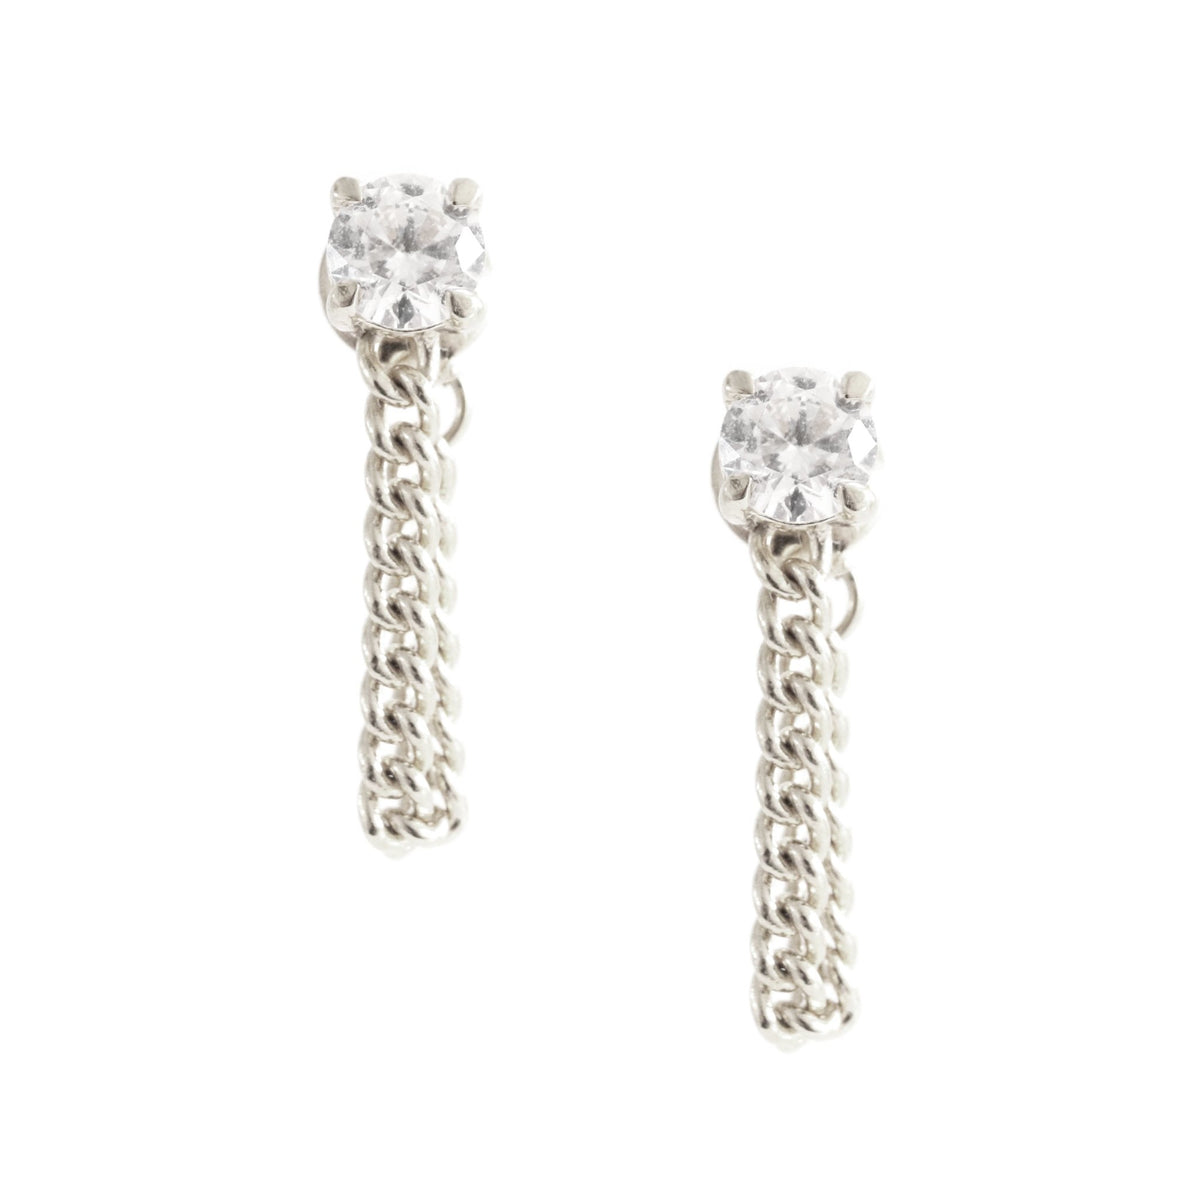 LOVE CABLE LINK CHAIN EARRINGS - CUBIC ZIRCONIA &amp; SILVER - SO PRETTY CARA COTTER